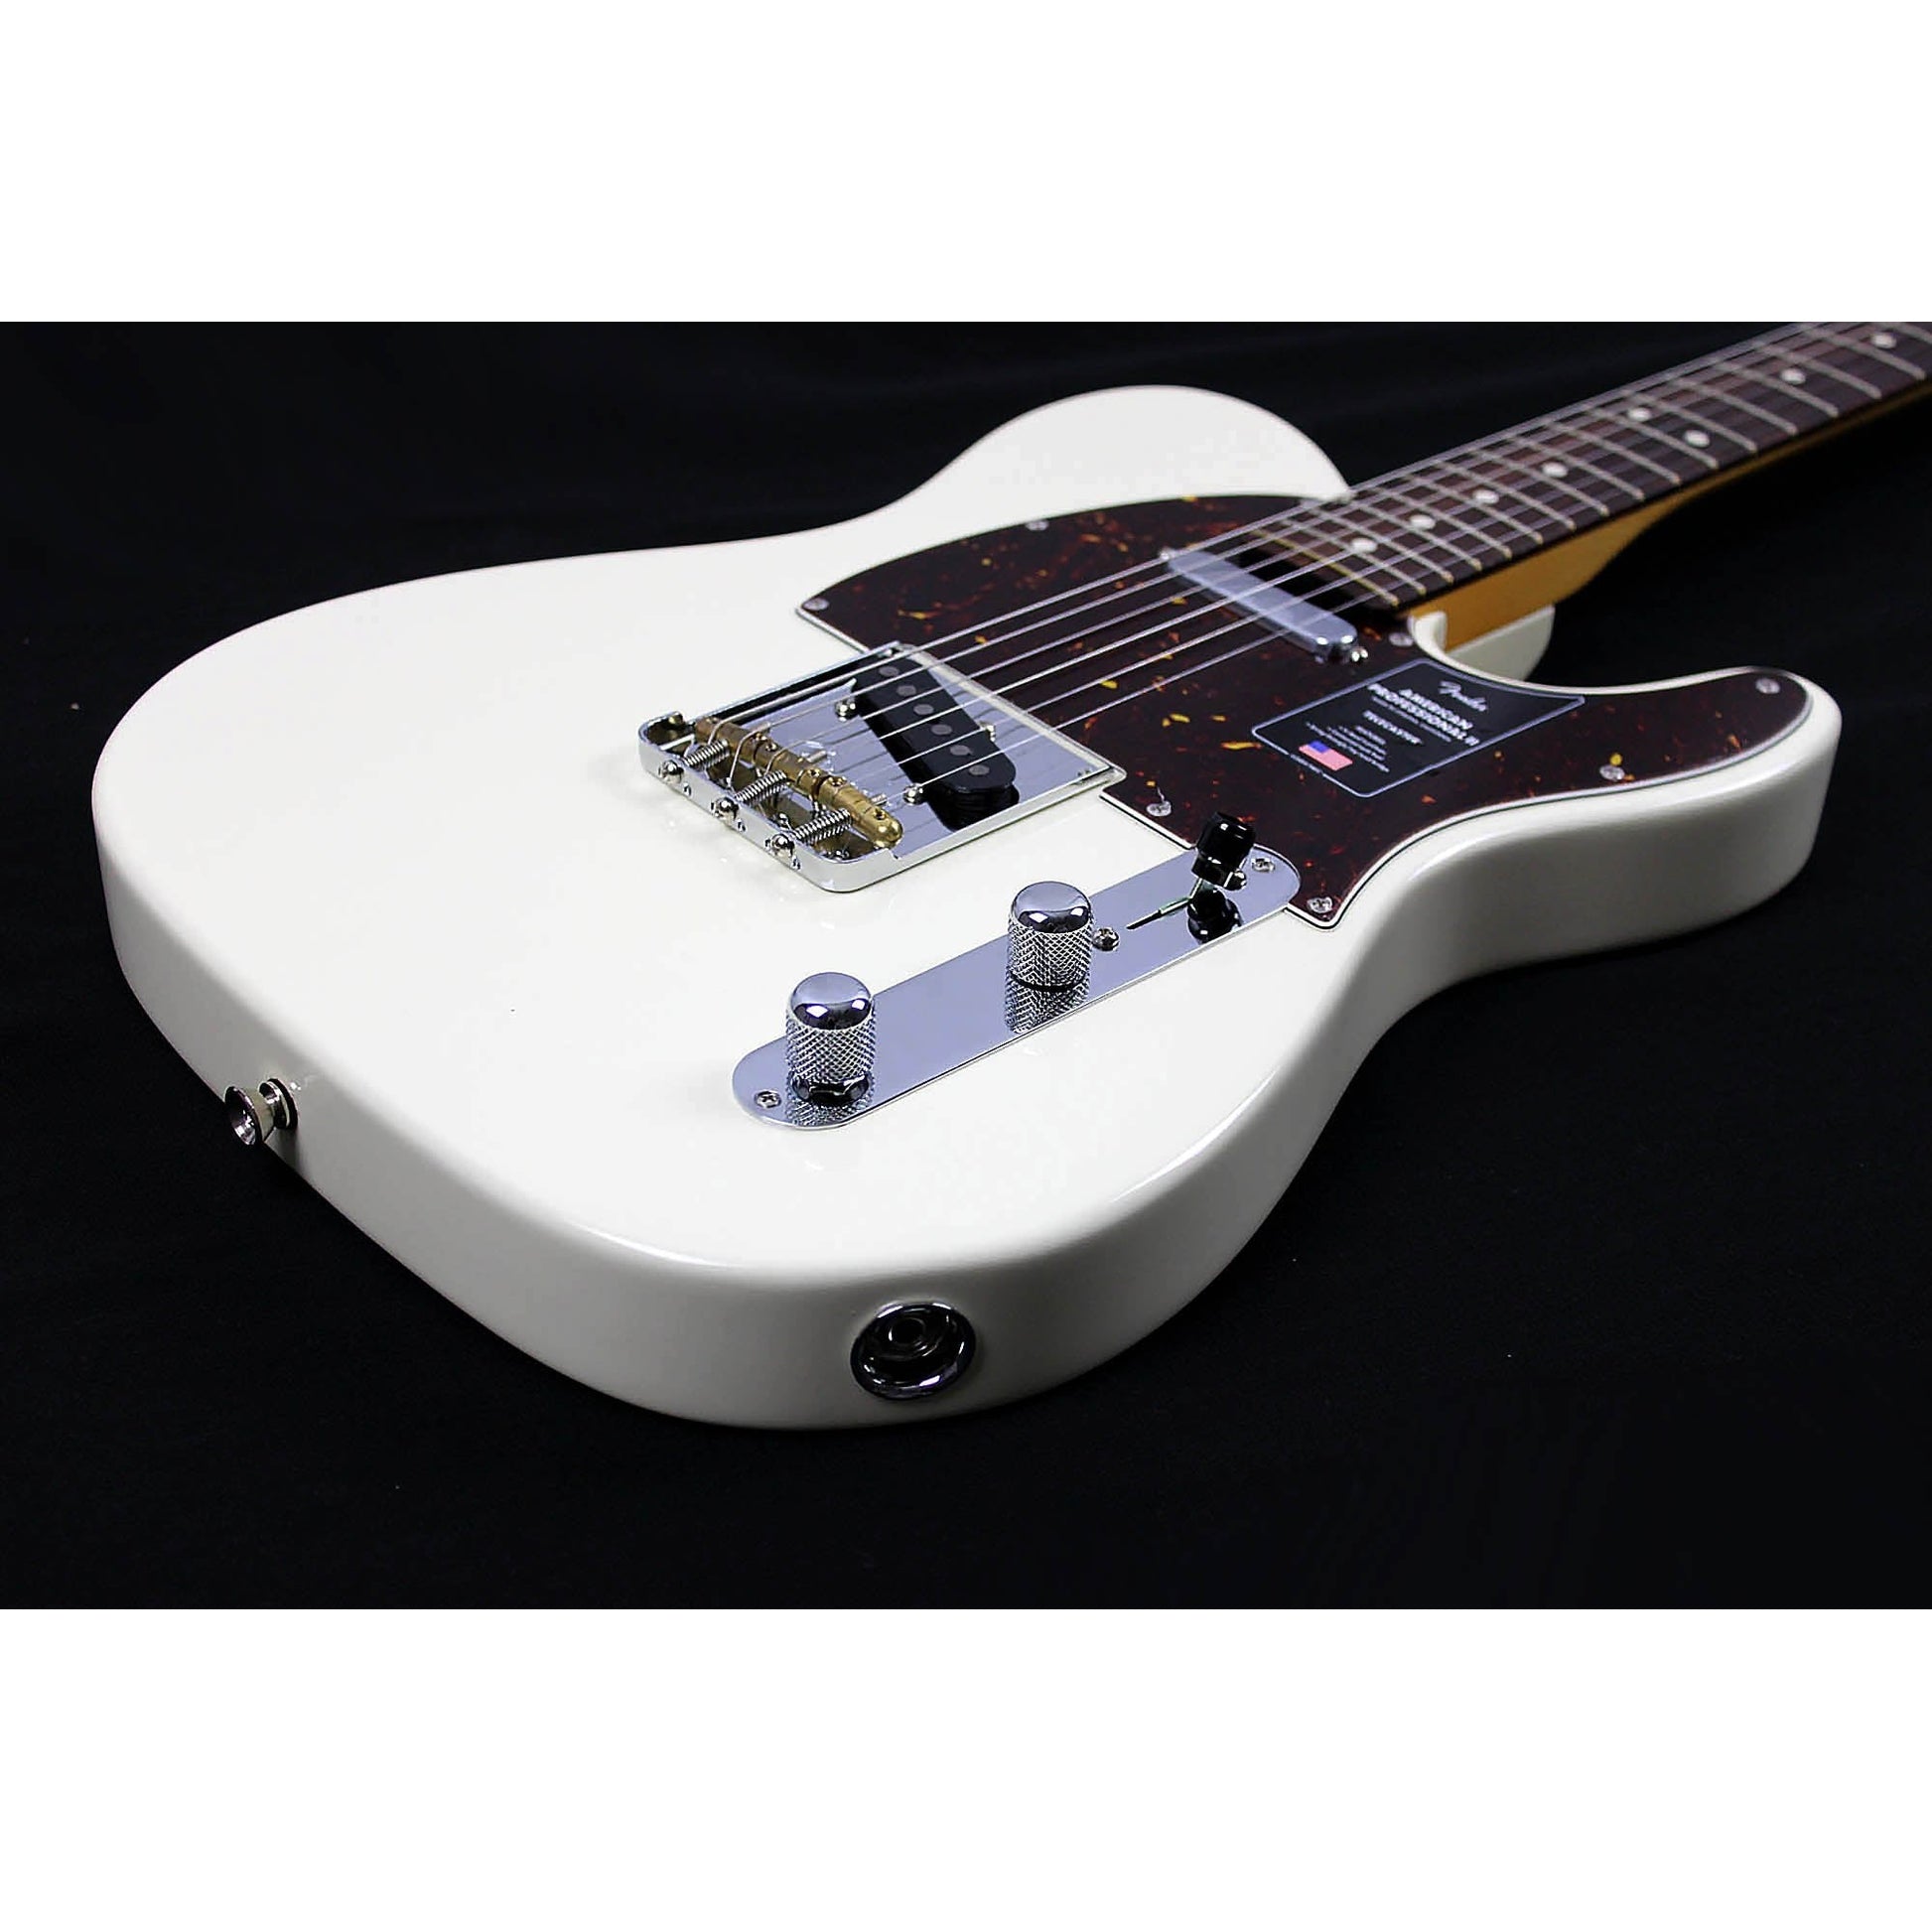 Fender American Professional II Telecaster - Olympic White with Rosewood Fingerboard - Leitz Music-885978574681-0113940705